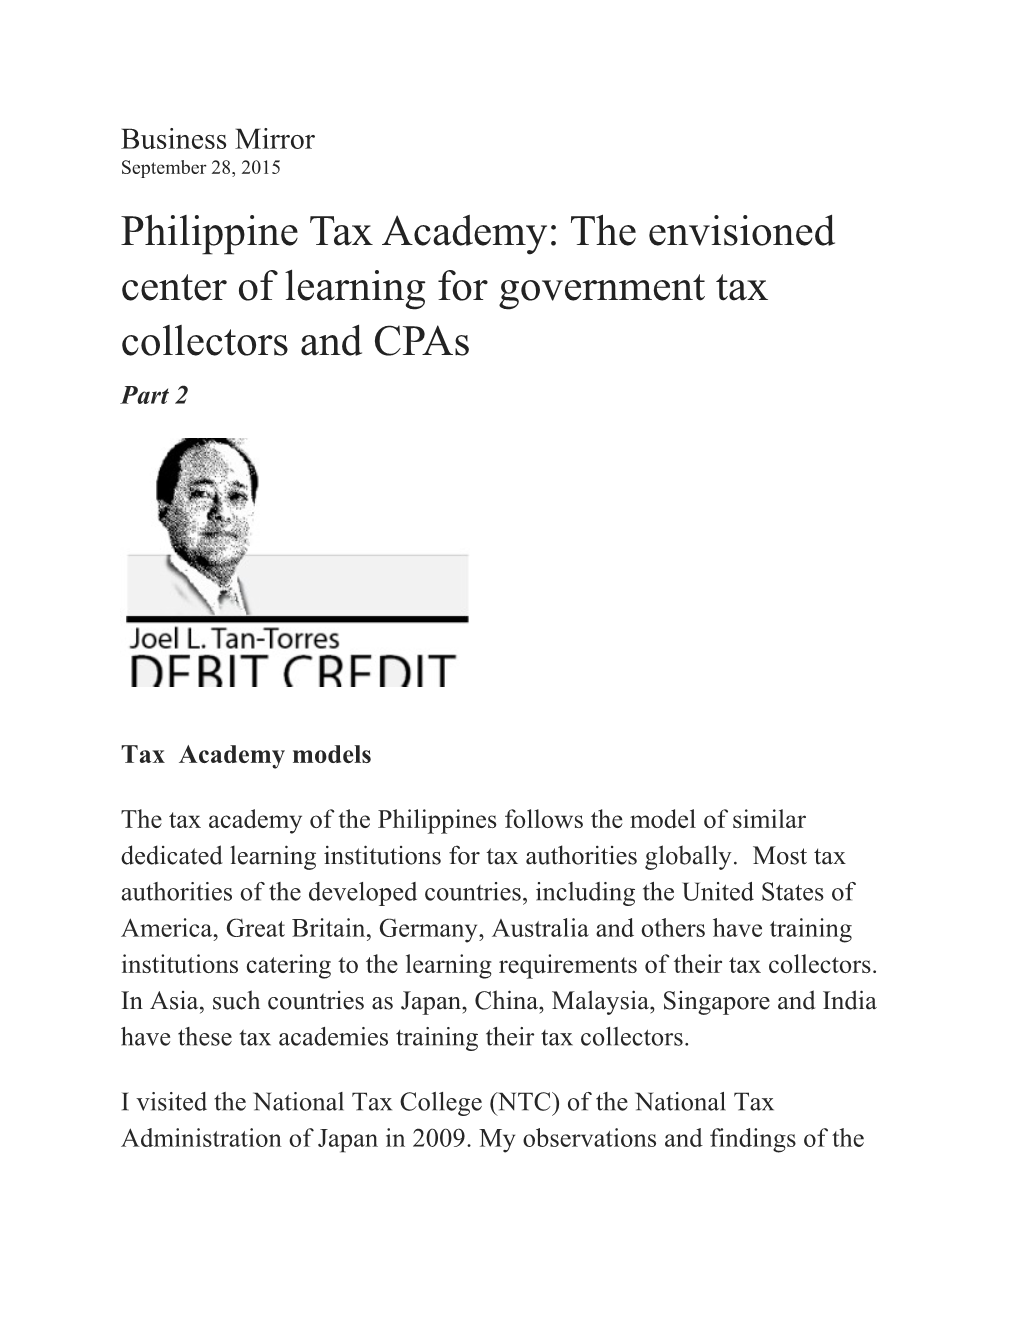 Philippine Tax Academy: the Envisioned Center of Learning for Government Tax Collectors and Cpas